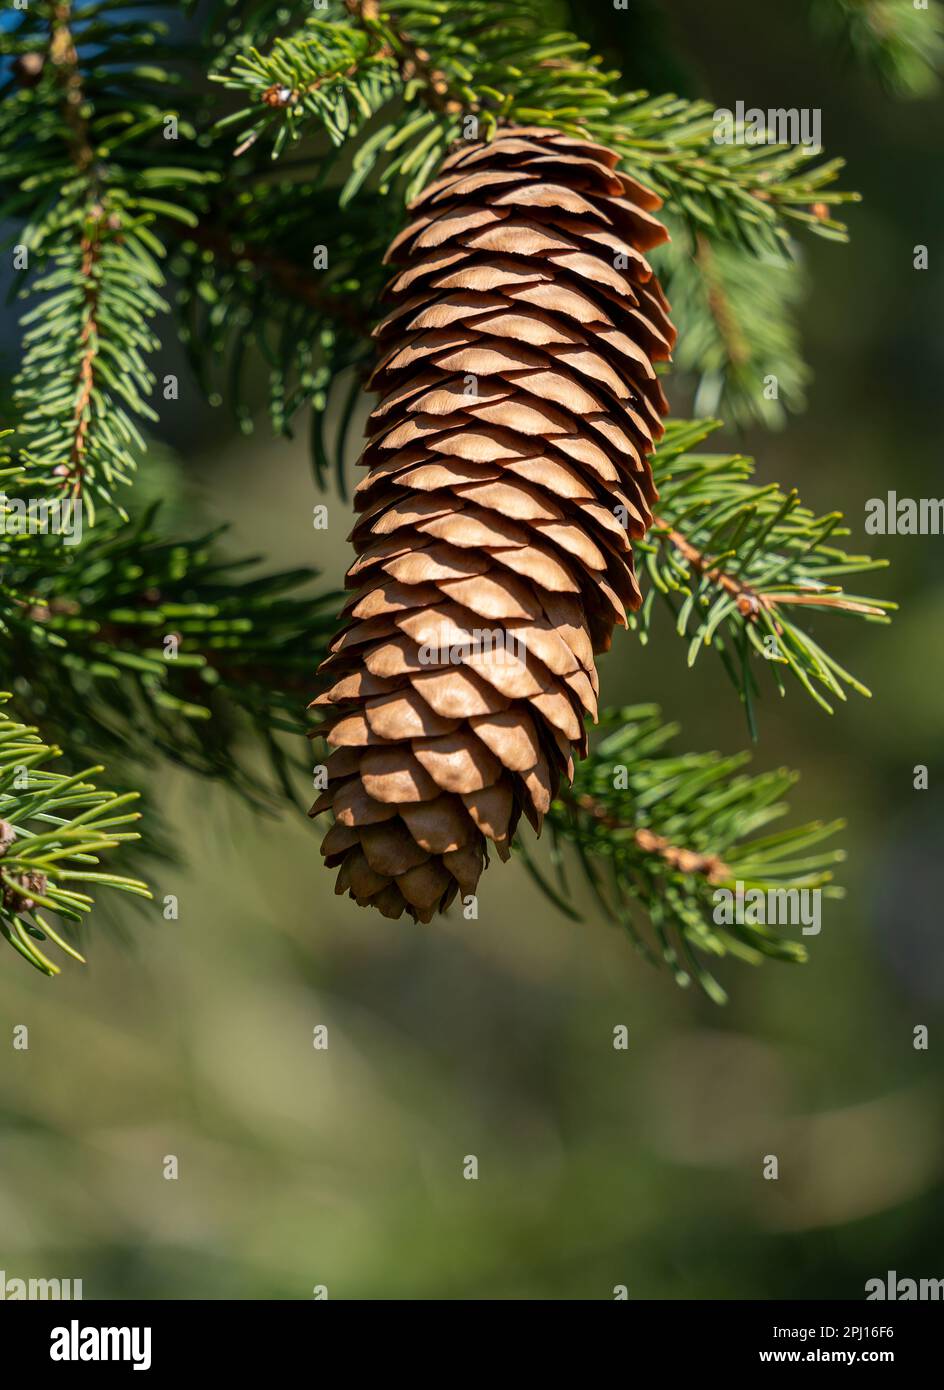 Low angle shot showing a spruce cone on a twig in sunny ambiance Stock Photo